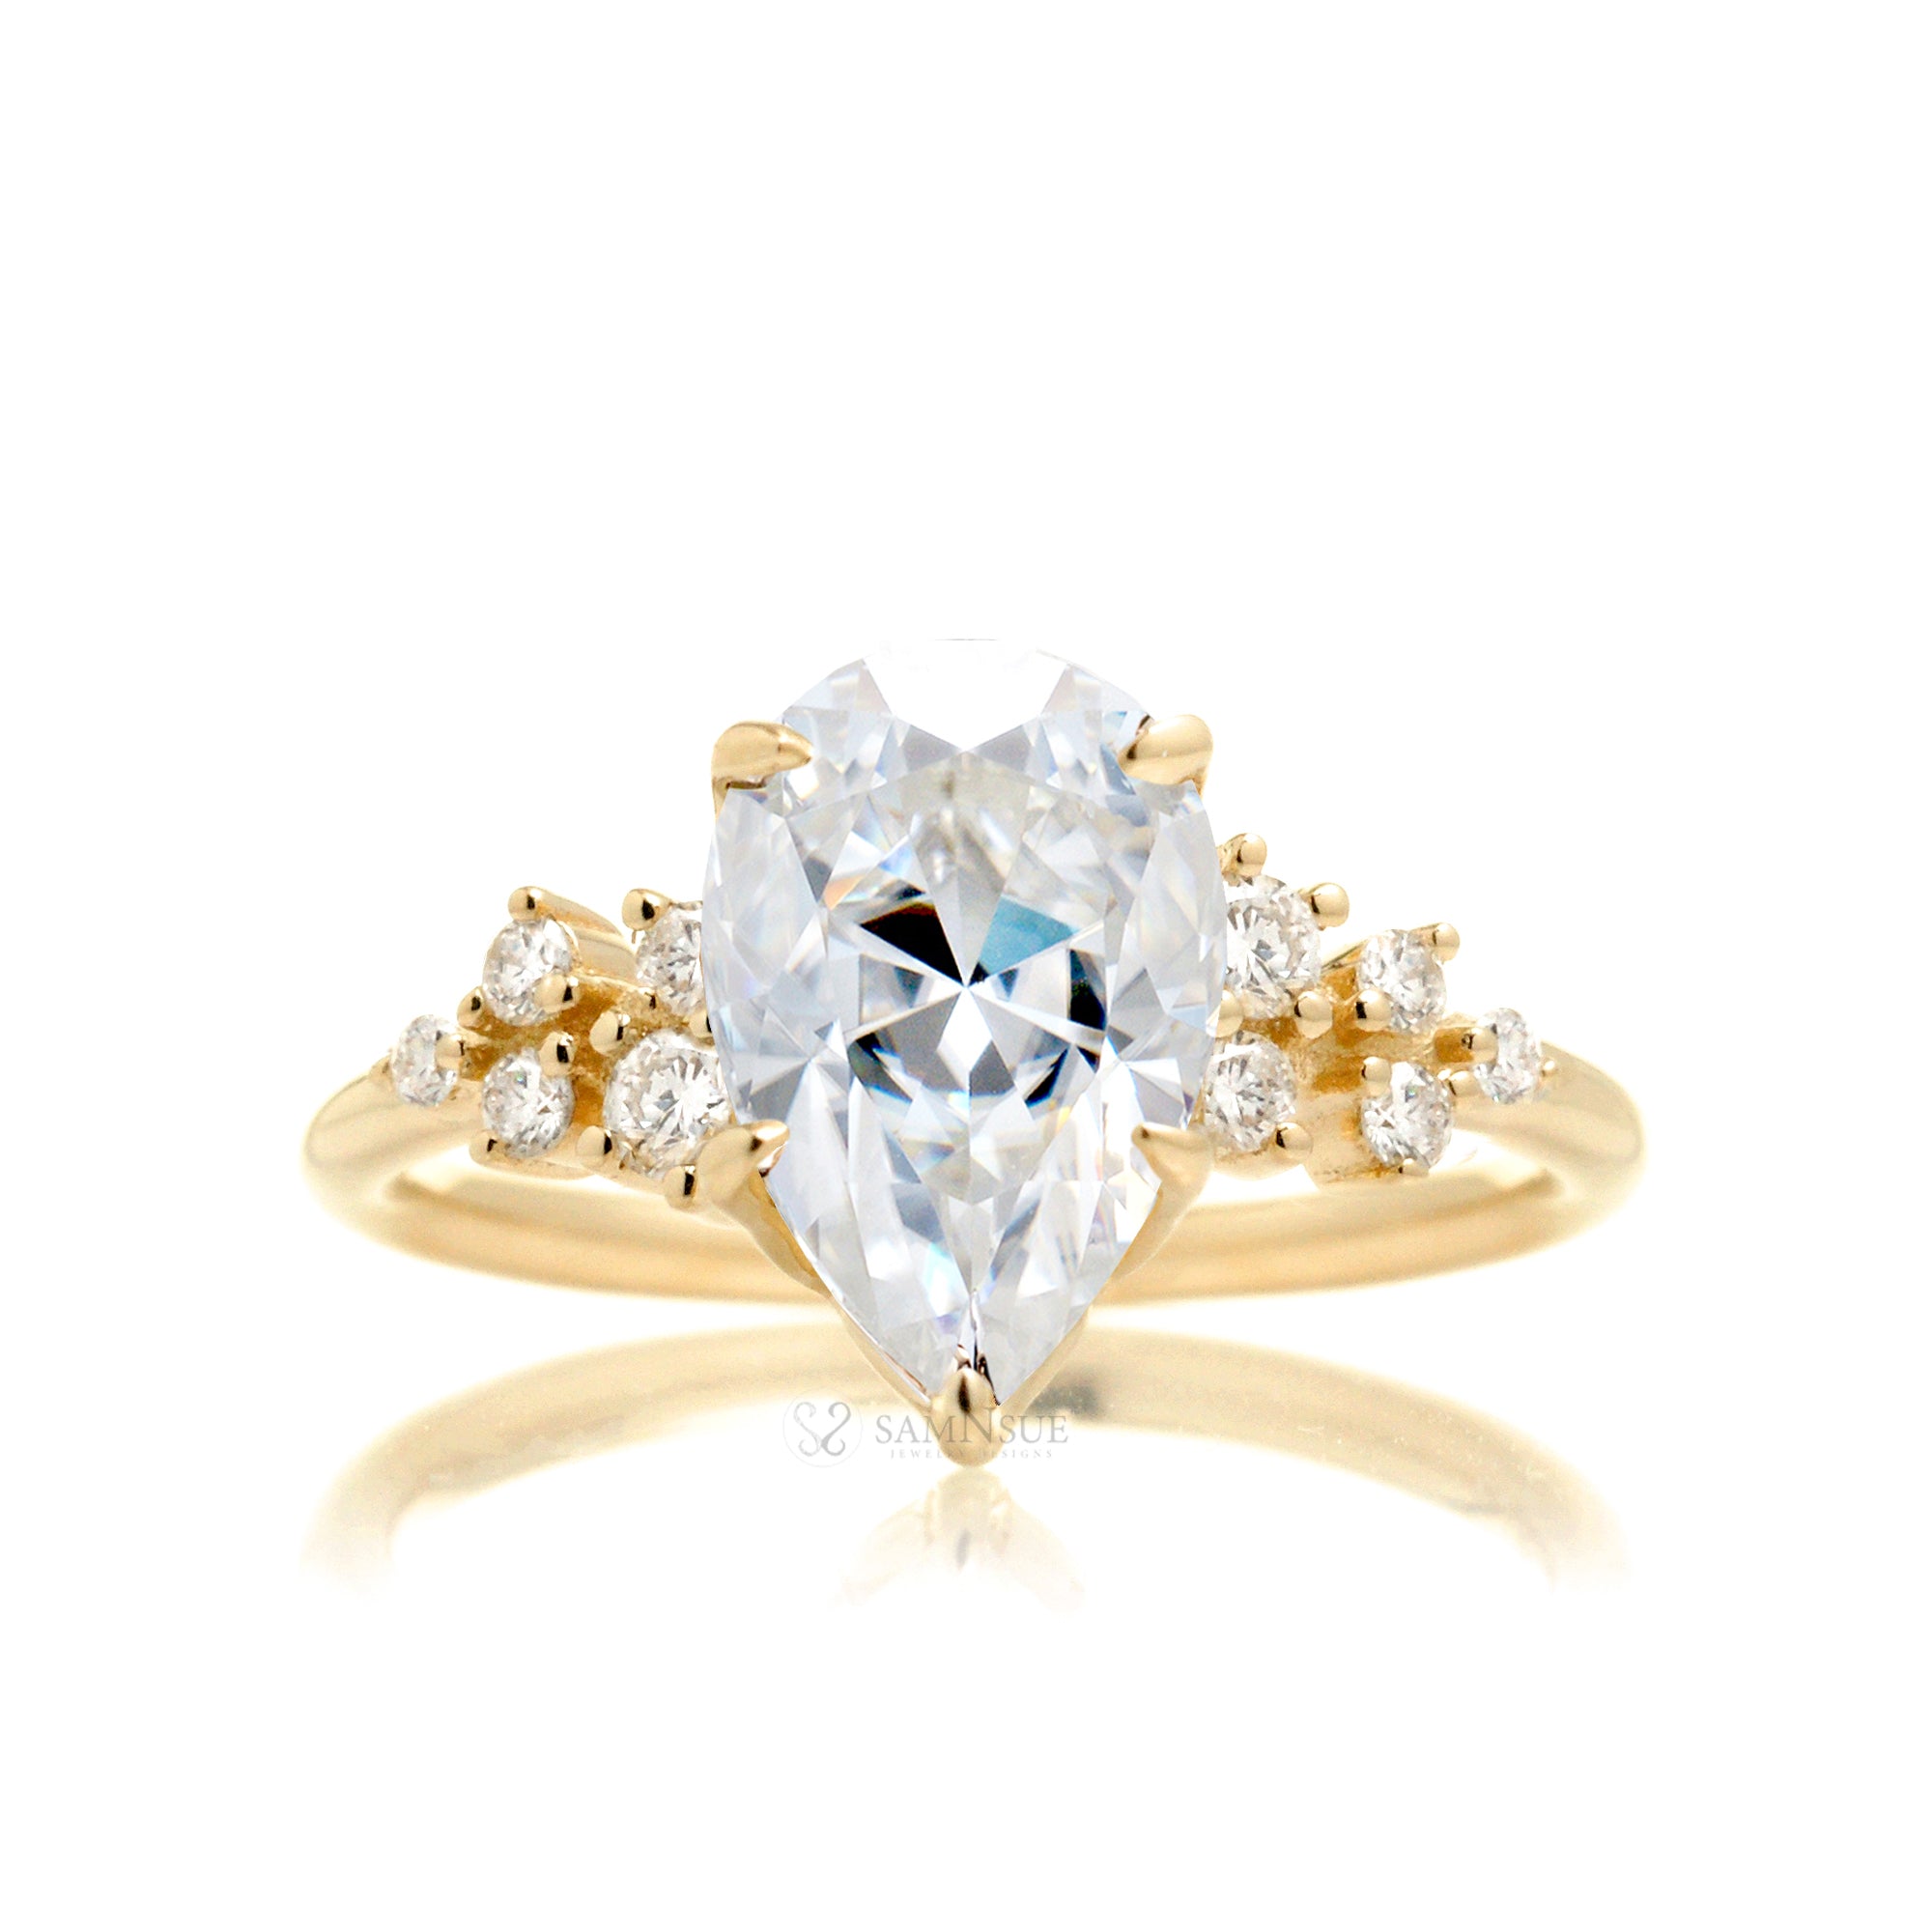 Pear moissanite diamond engagement ring the Stella constellation yellow gold ring